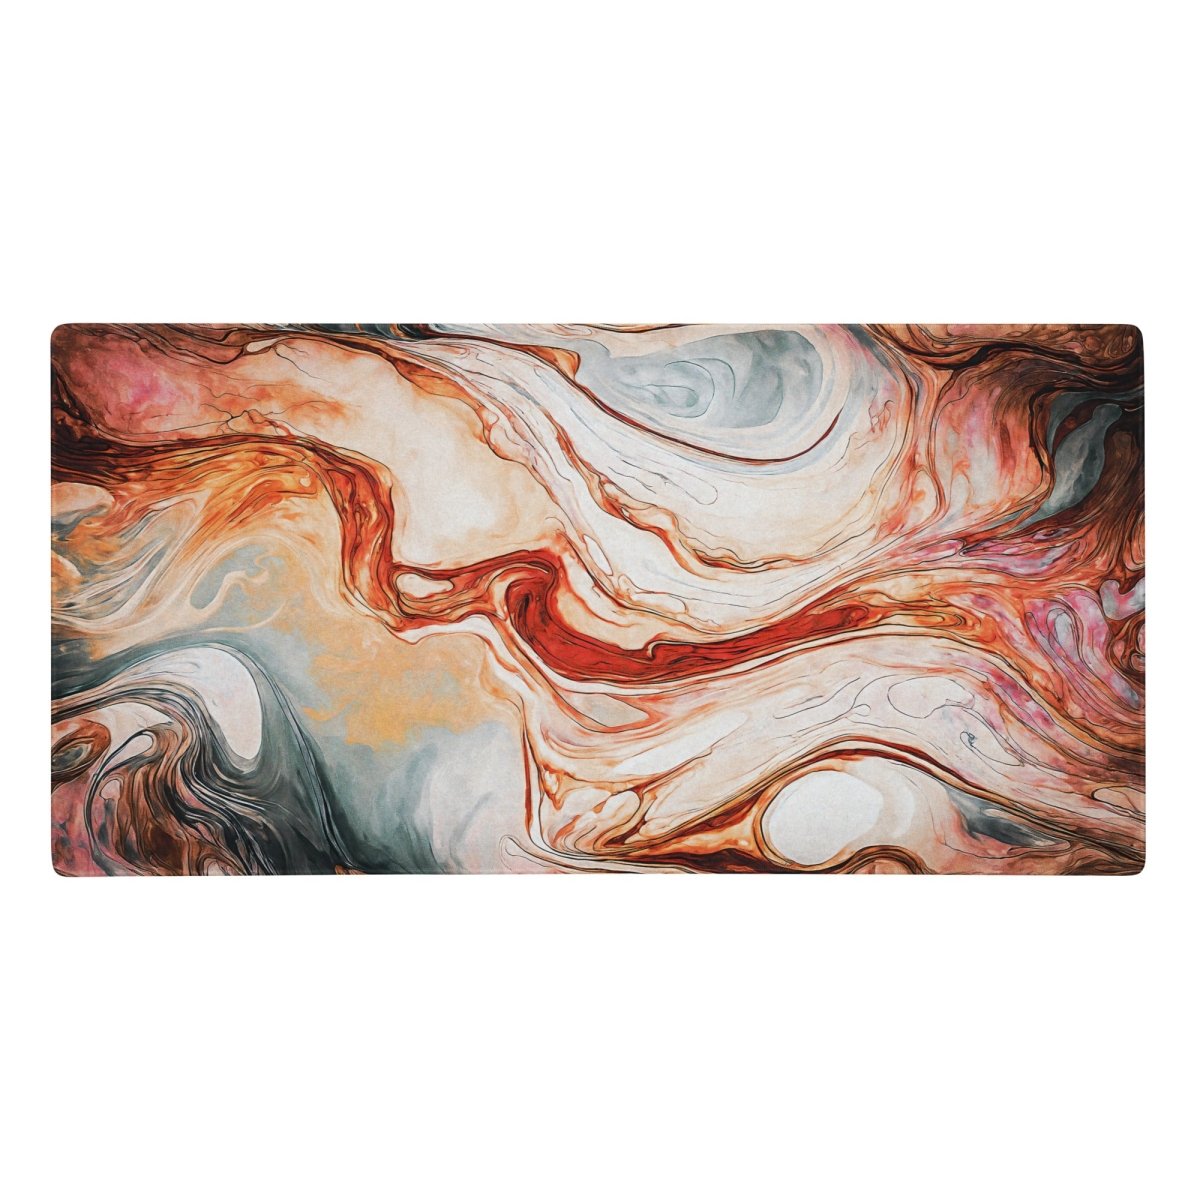 Swirl nebula - Gaming mouse pad - Ever colorful